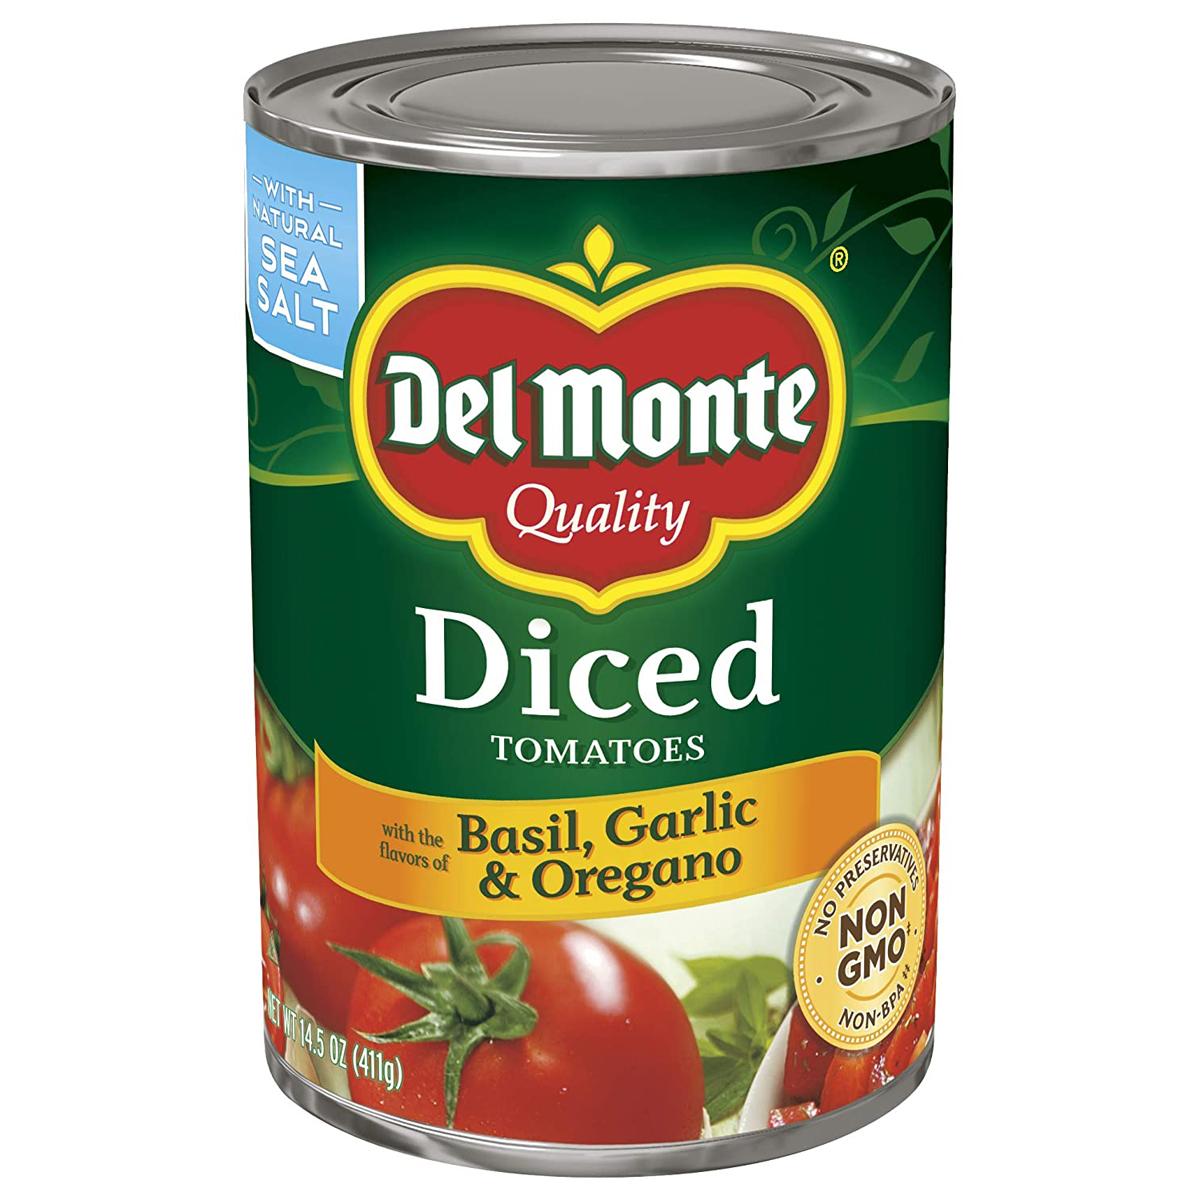 12 Del Monte Canned Diced Tomatoes for $11.52 Shipped